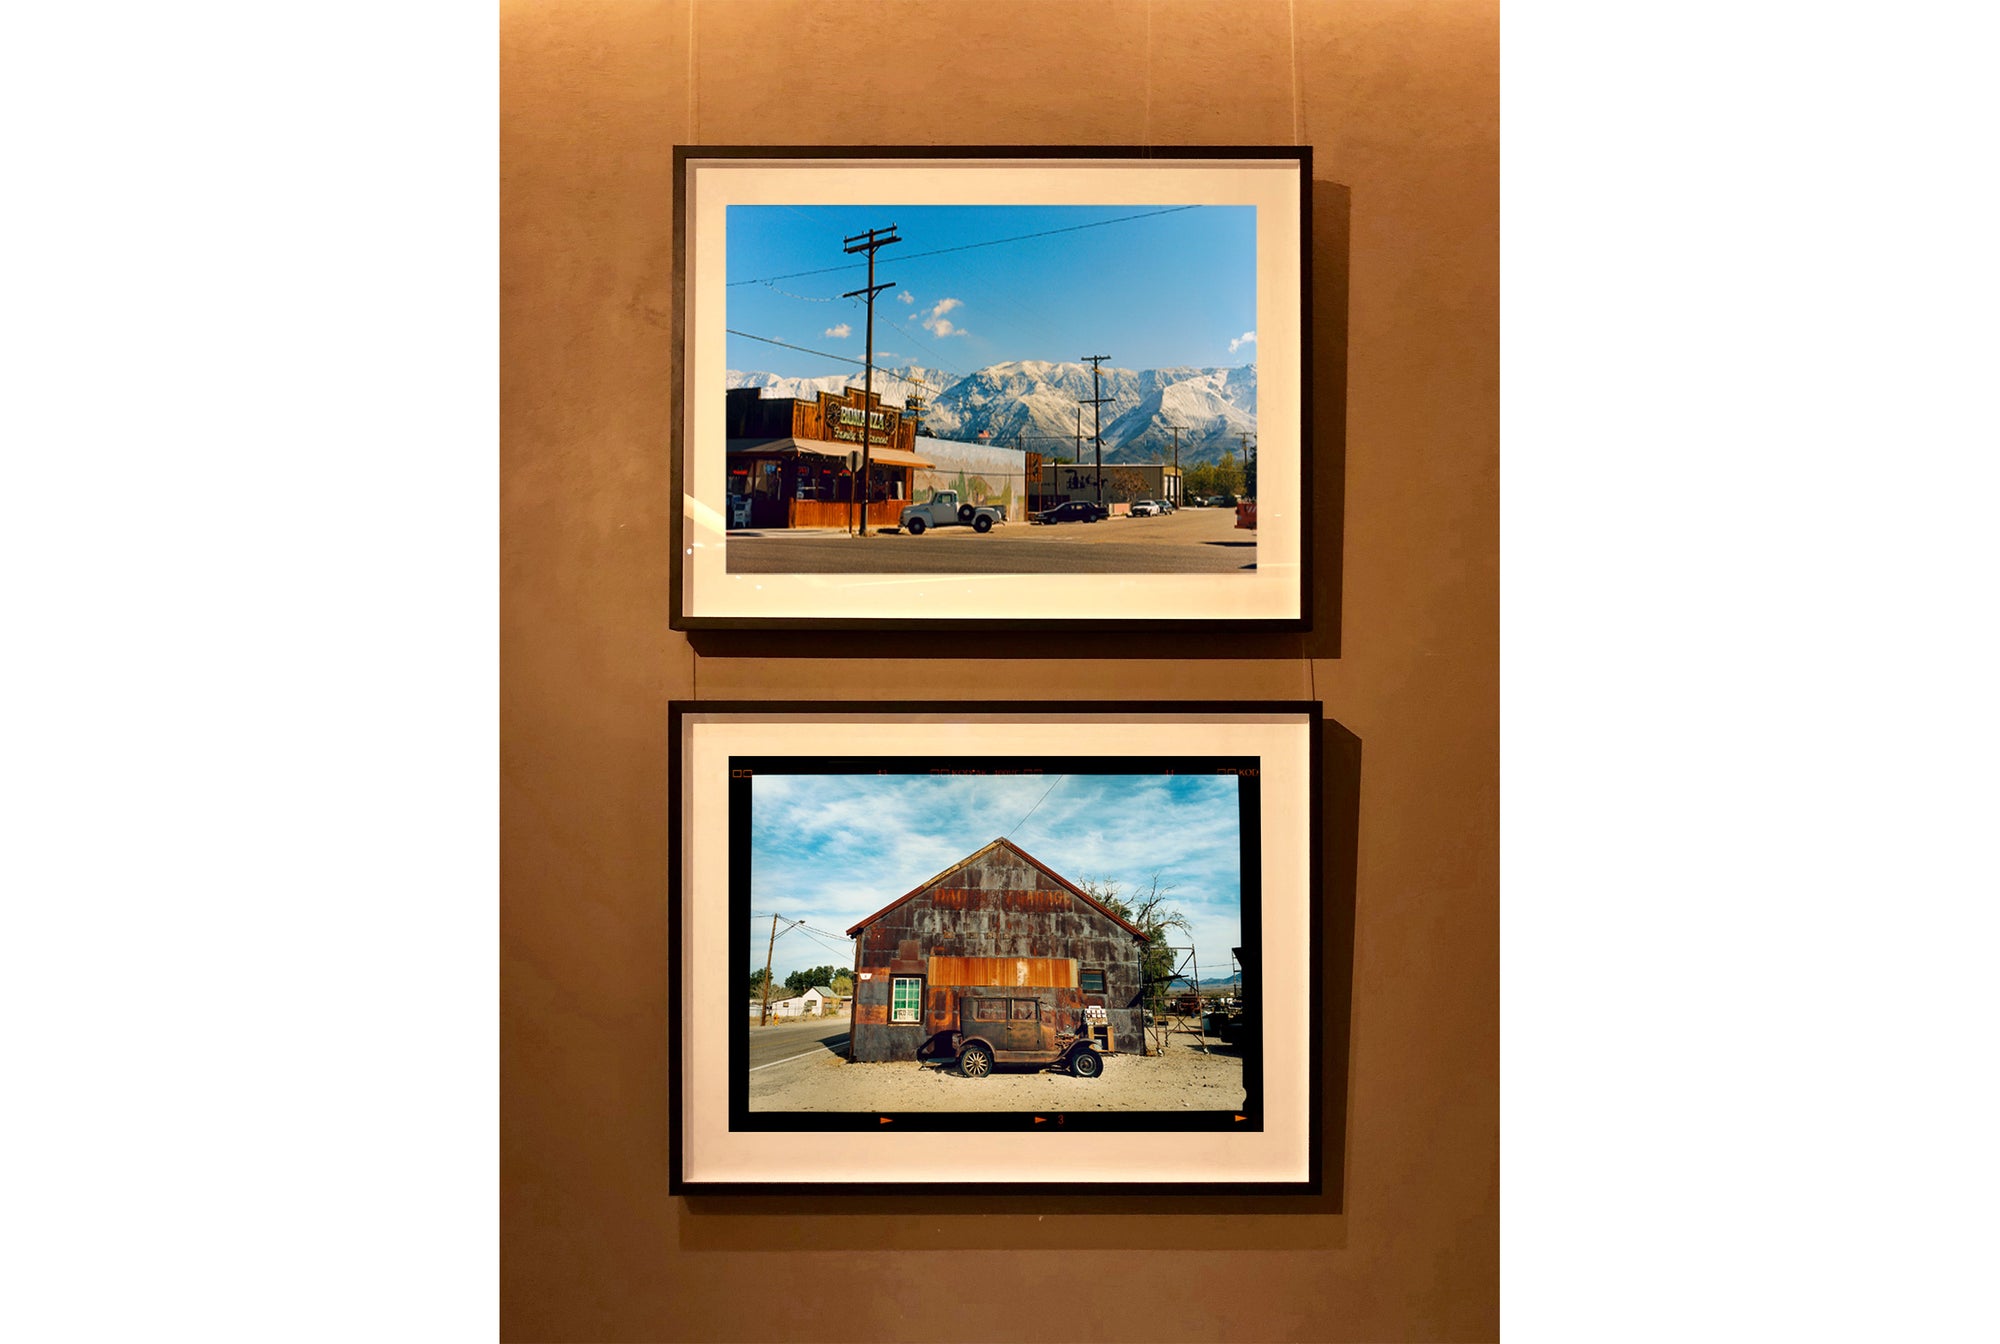 There is a cinematic style to this artwork, 'Lone Pine', taken in a former movie town in California where many Western films were made. Taken outside Richard's iconic interior photograph 'Bonanza Café', set in the Owens Valley against a mountainous  backdrop.